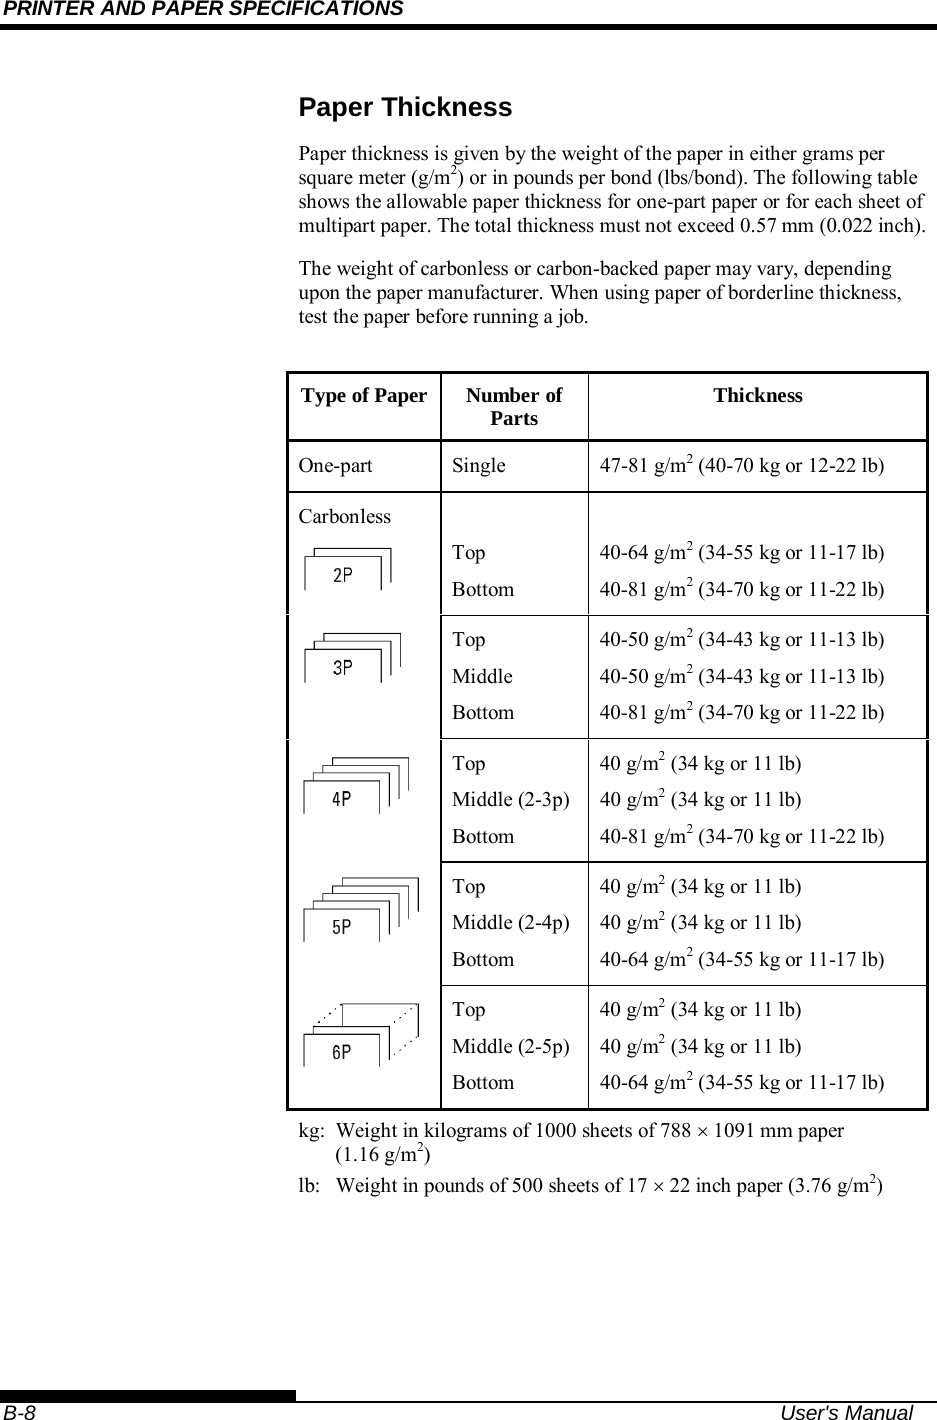 PRINTER AND PAPER SPECIFICATIONS    B-8  User&apos;s Manual Paper Thickness Paper thickness is given by the weight of the paper in either grams per square meter (g/m2) or in pounds per bond (lbs/bond). The following table shows the allowable paper thickness for one-part paper or for each sheet of multipart paper. The total thickness must not exceed 0.57 mm (0.022 inch). The weight of carbonless or carbon-backed paper may vary, depending upon the paper manufacturer. When using paper of borderline thickness, test the paper before running a job.  Type of Paper Number of Parts  Thickness One-part Single  47-81 g/m2 (40-70 kg or 12-22 lb) Carbonless  Top Bottom  40-64 g/m2 (34-55 kg or 11-17 lb) 40-81 g/m2 (34-70 kg or 11-22 lb) Top Middle Bottom 40-50 g/m2 (34-43 kg or 11-13 lb) 40-50 g/m2 (34-43 kg or 11-13 lb) 40-81 g/m2 (34-70 kg or 11-22 lb) Top Middle (2-3p) Bottom 40 g/m2 (34 kg or 11 lb) 40 g/m2 (34 kg or 11 lb) 40-81 g/m2 (34-70 kg or 11-22 lb) Top Middle (2-4p) Bottom 40 g/m2 (34 kg or 11 lb) 40 g/m2 (34 kg or 11 lb) 40-64 g/m2 (34-55 kg or 11-17 lb) Top Middle (2-5p) Bottom 40 g/m2 (34 kg or 11 lb) 40 g/m2 (34 kg or 11 lb) 40-64 g/m2 (34-55 kg or 11-17 lb) kg:  Weight in kilograms of 1000 sheets of 788  1091 mm paper (1.16 g/m2) lb:  Weight in pounds of 500 sheets of 17  22 inch paper (3.76 g/m2)   